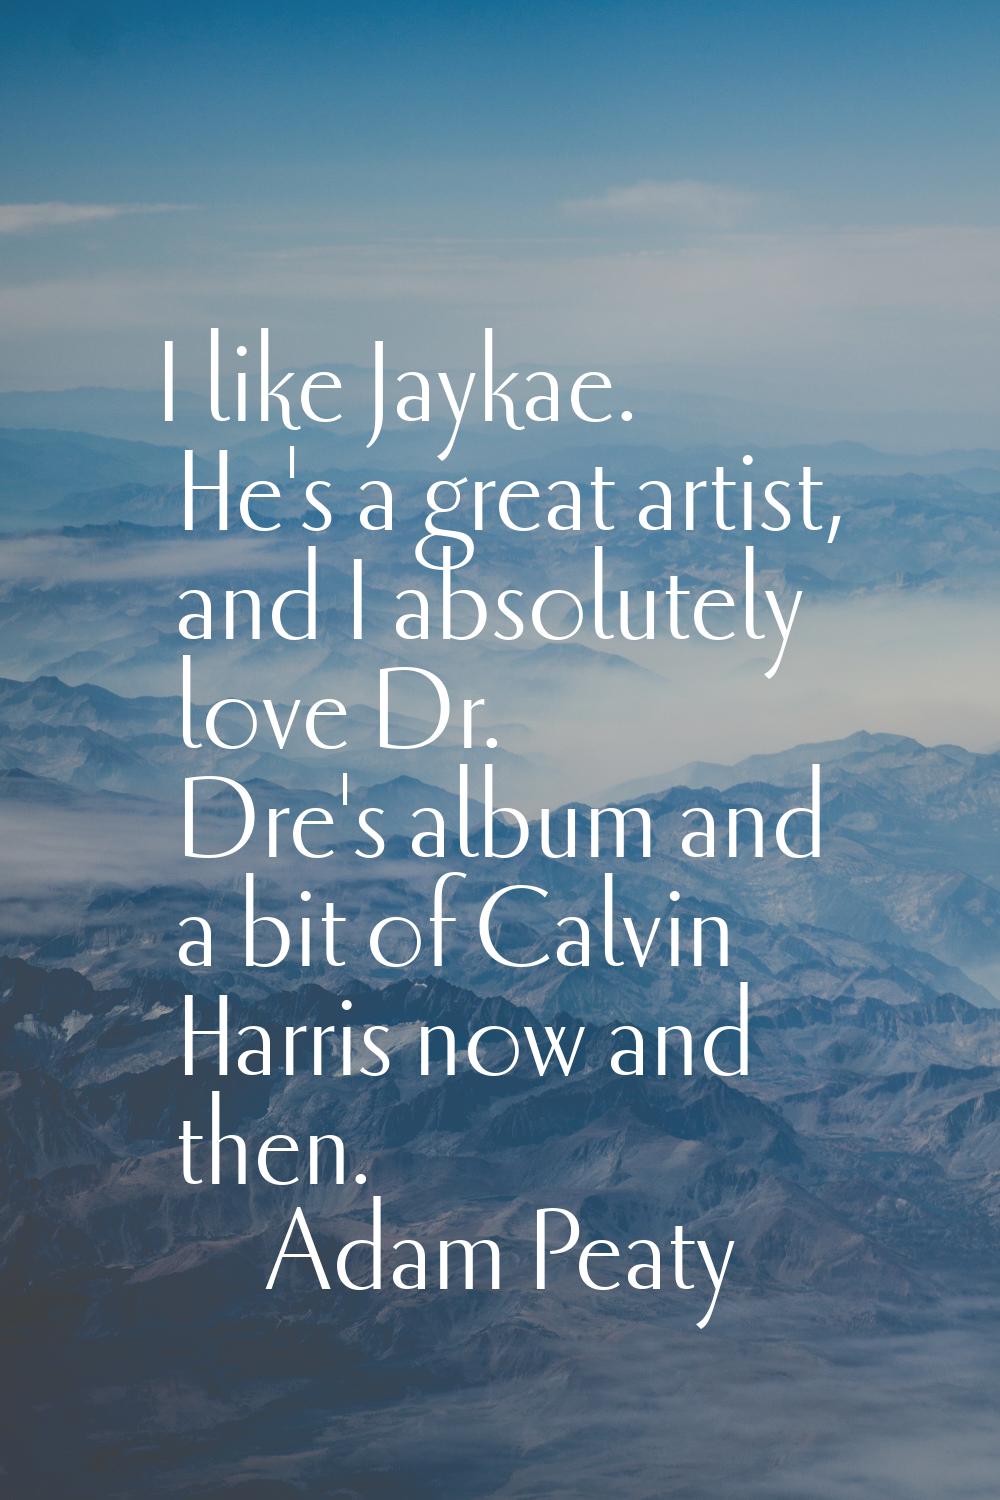 I like Jaykae. He's a great artist, and I absolutely love Dr. Dre's album and a bit of Calvin Harri